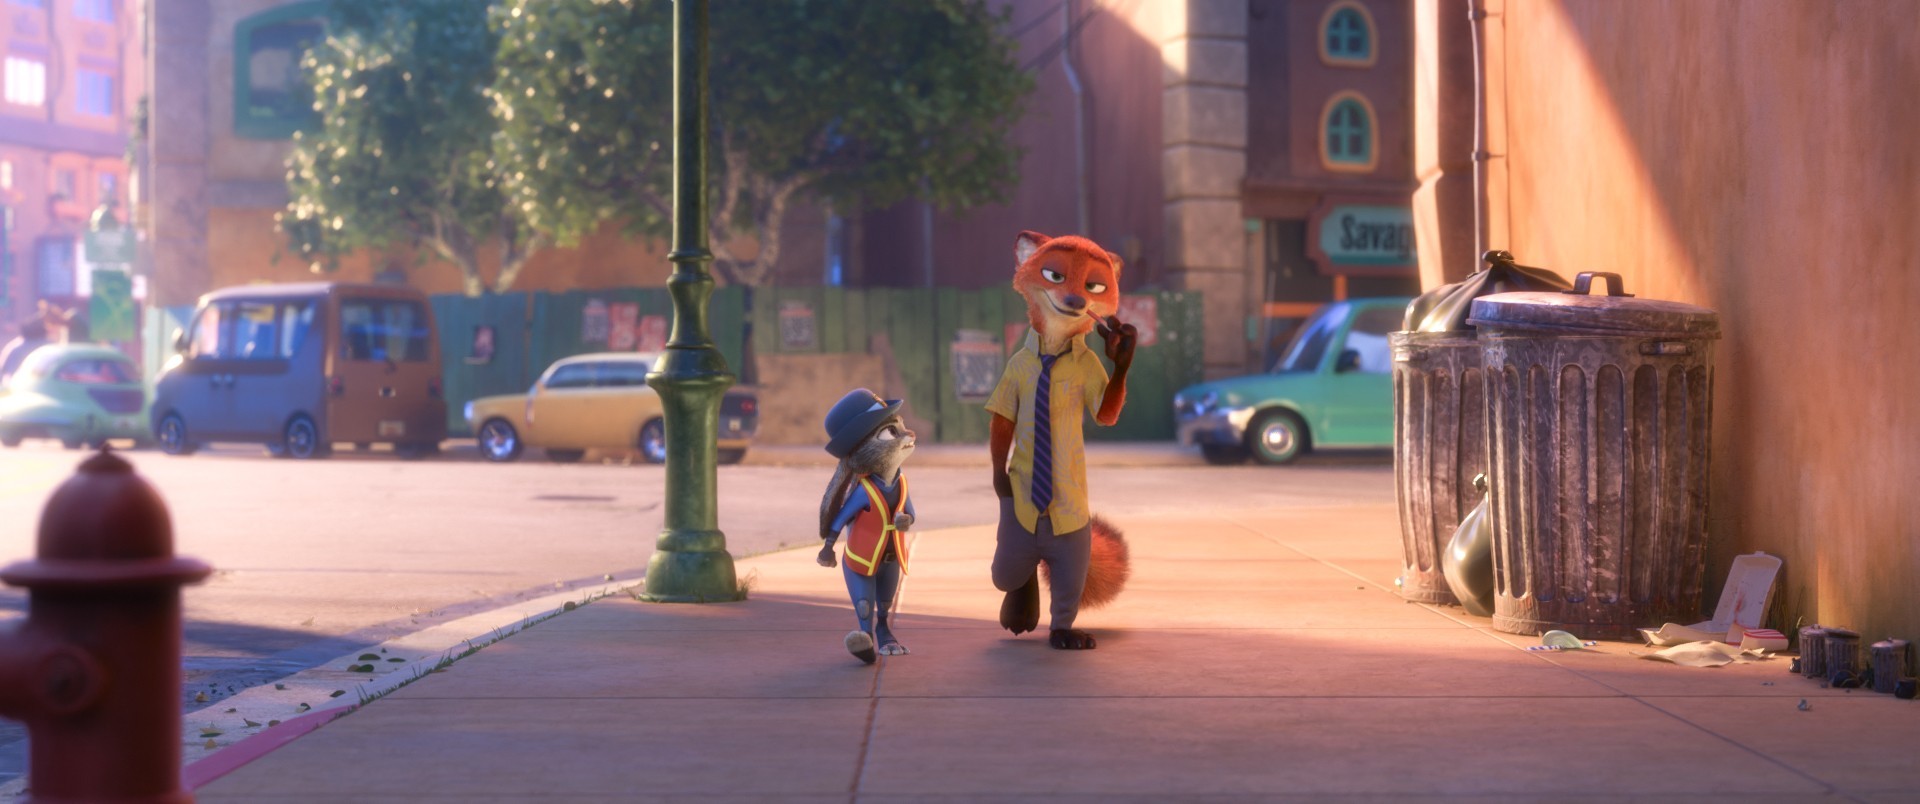 Judy Hopps and Nick Wilde from Walt Disney Pictures' Zootopia (2016)